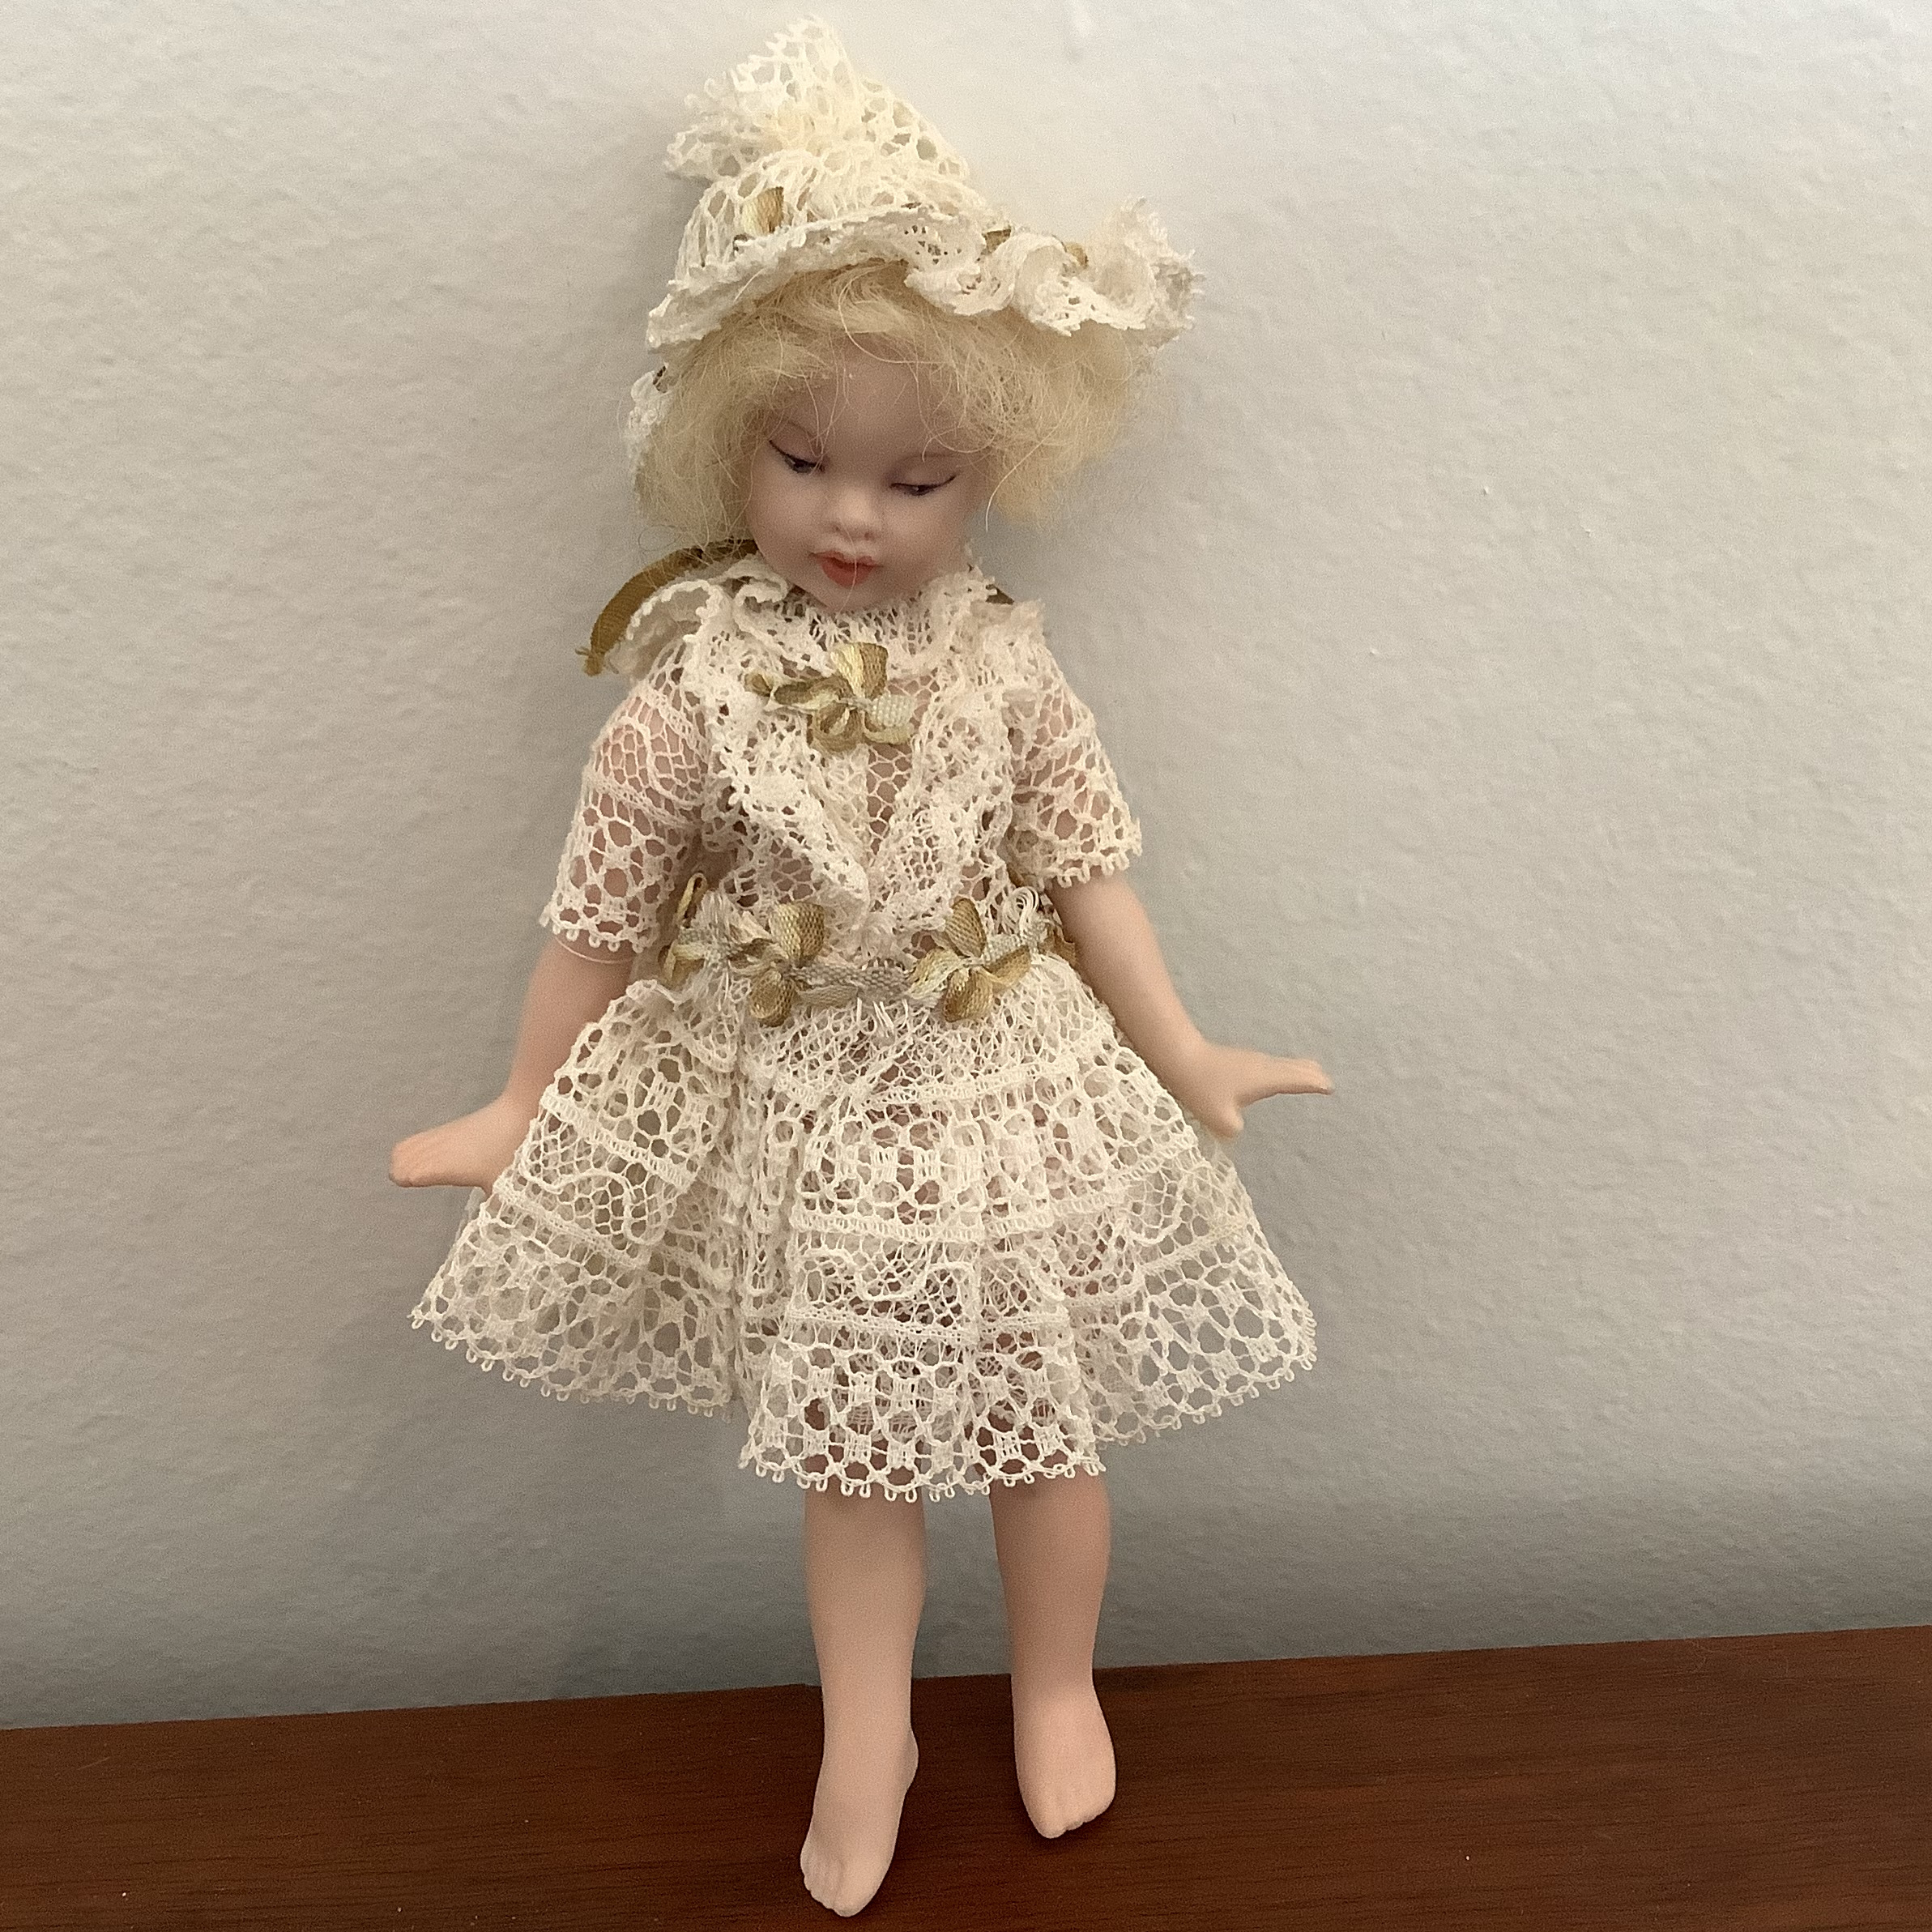 Small, blond, light-skinned doll wearing dress made entirely out of lace and matching bonnet